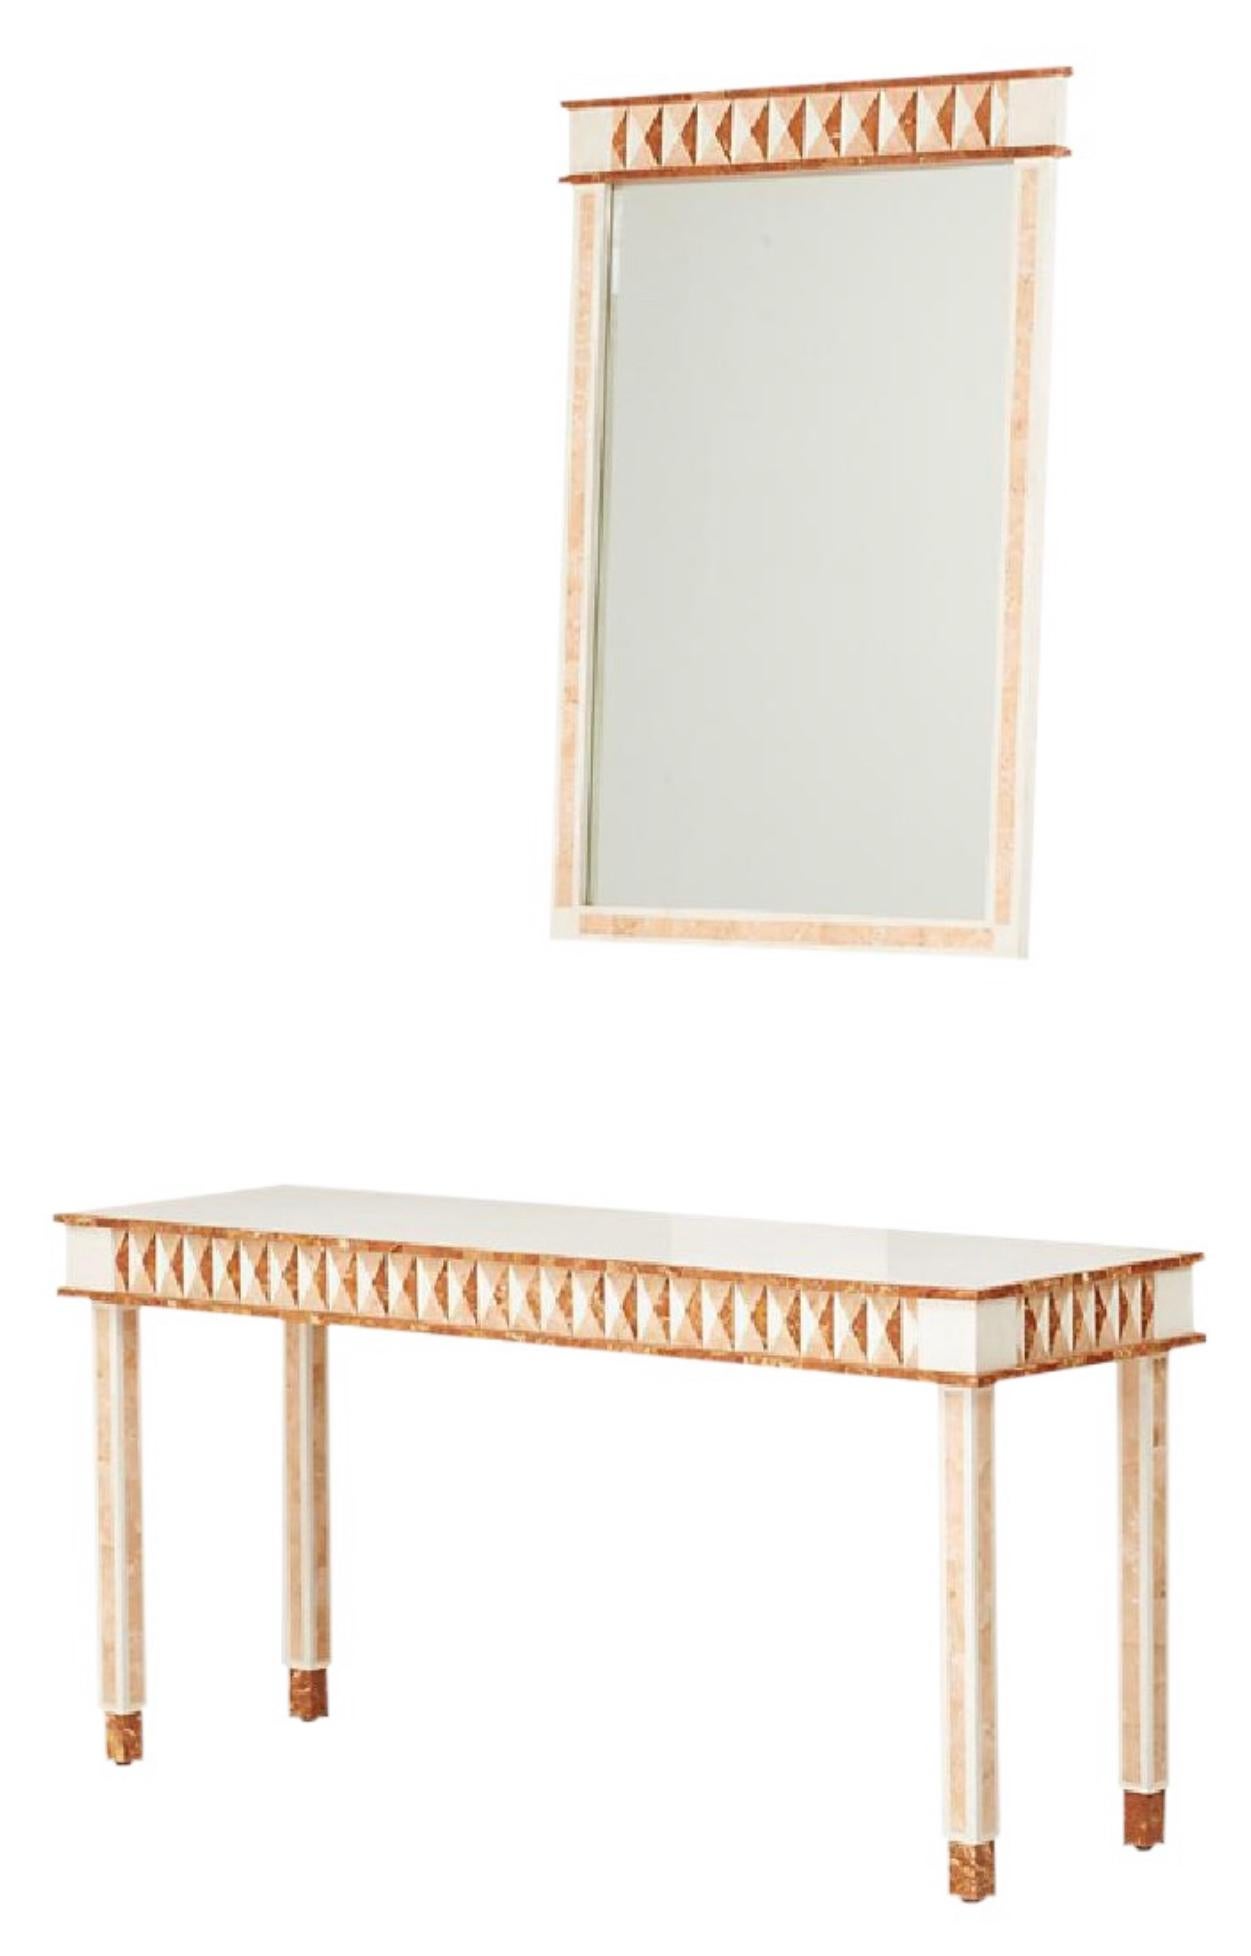 Neoclassical tessellated marble Maitland-Smith console table and wall mirror, 1980s

Stunning tessellated marble console table and wall mirror set by Maitland Smith. Lovely geometric pattern, juxtaposition of cream, red and coral pink marble.